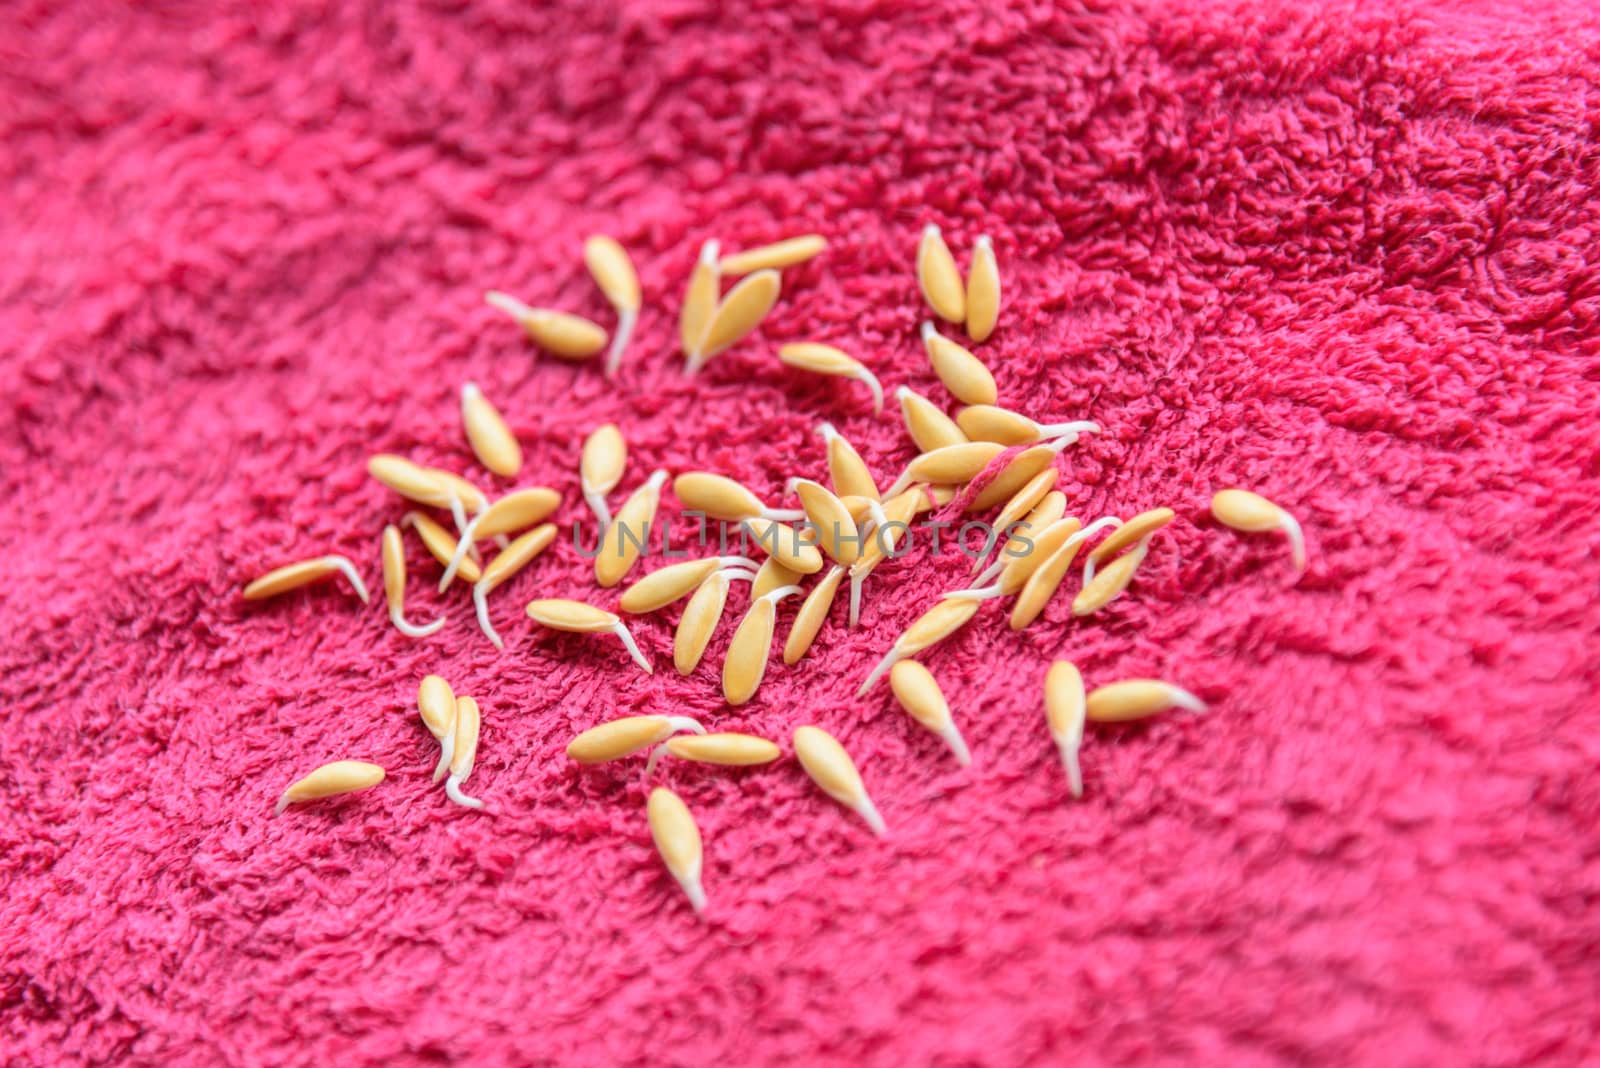 germinate melon Seed on pink cloth